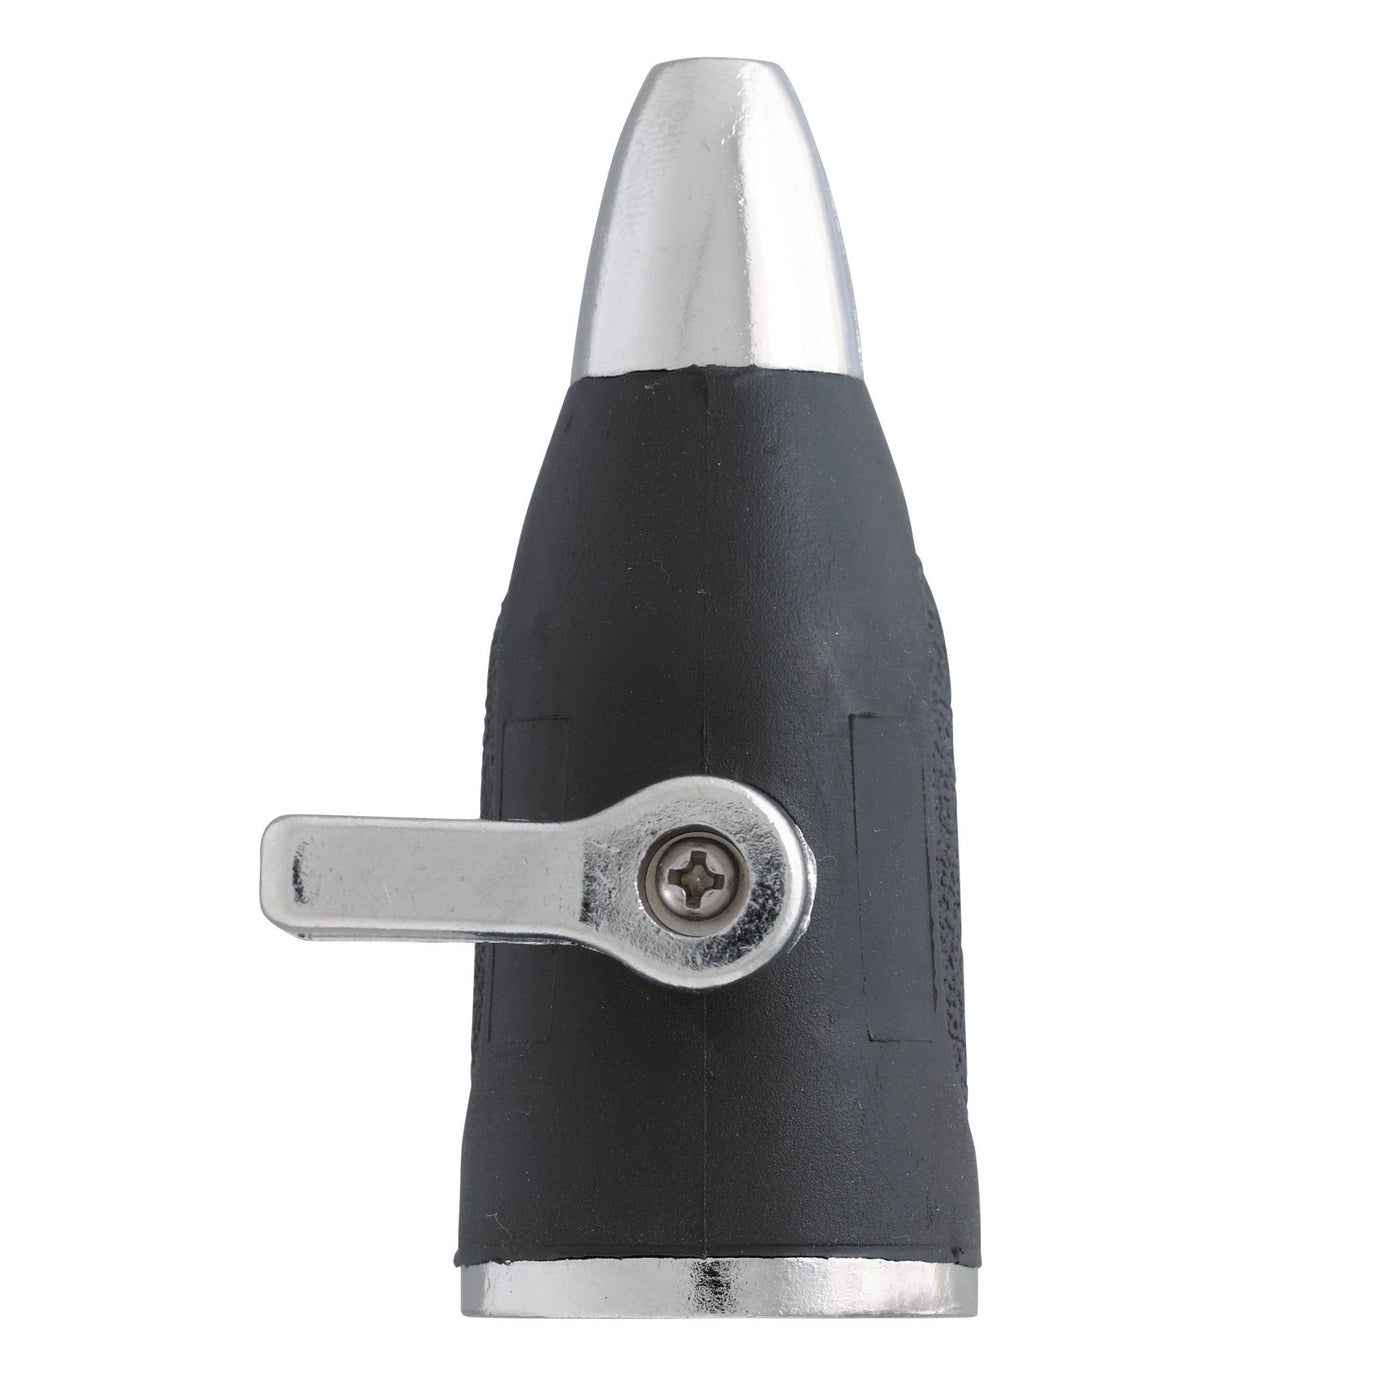 A zinc sweeper nozzle with shut off lever and rubber non-slip grip.